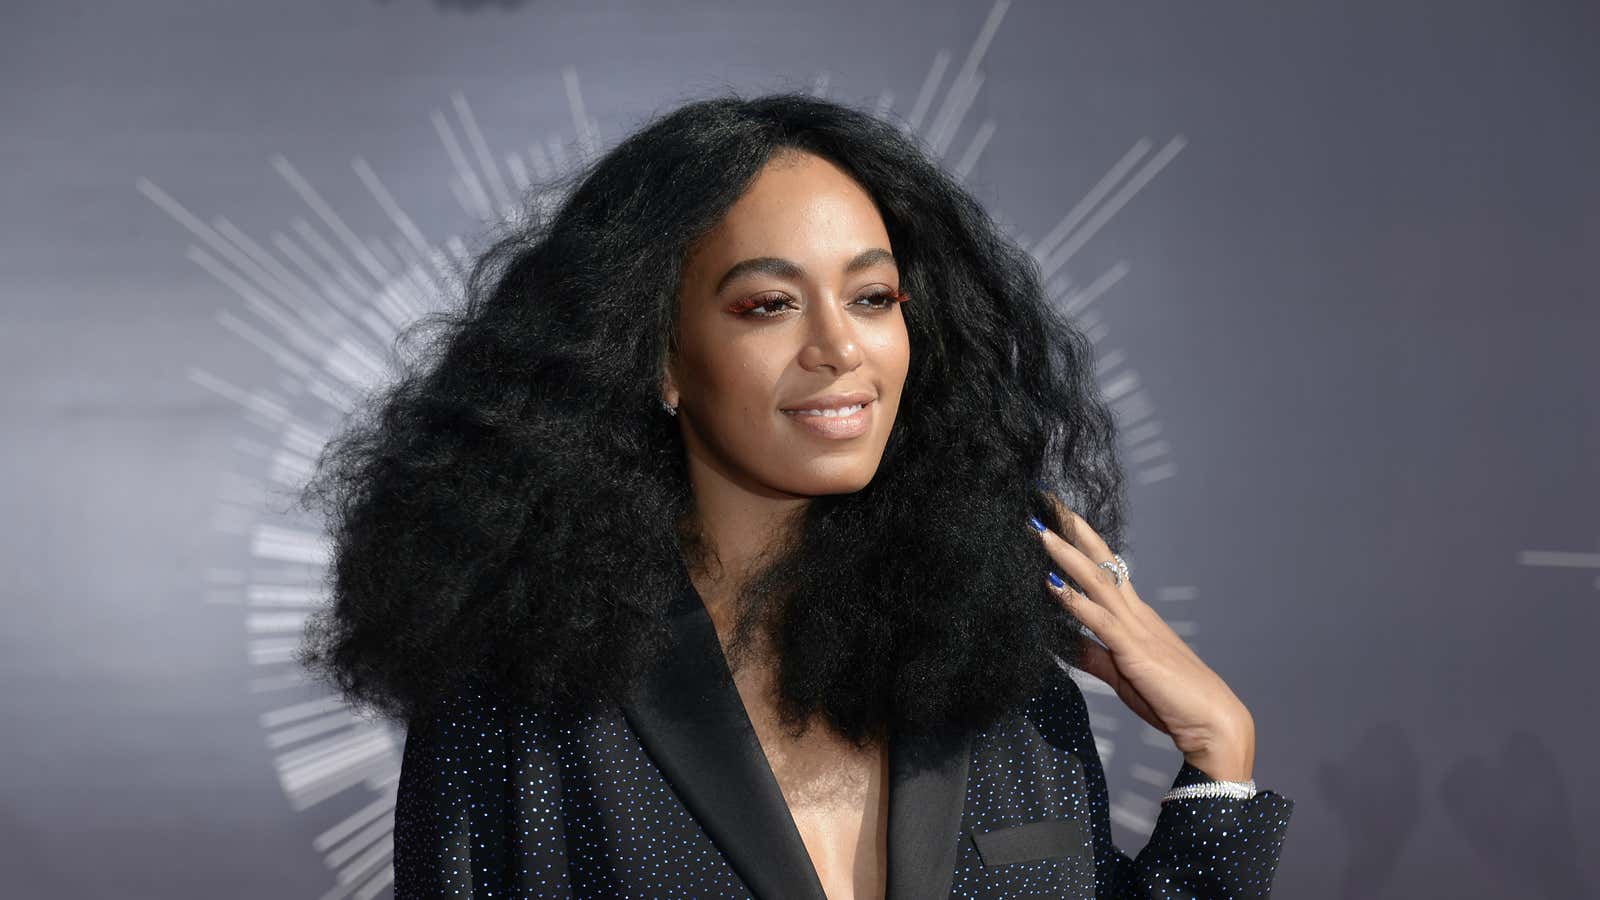 Let Solange Knowles explain her music to you.